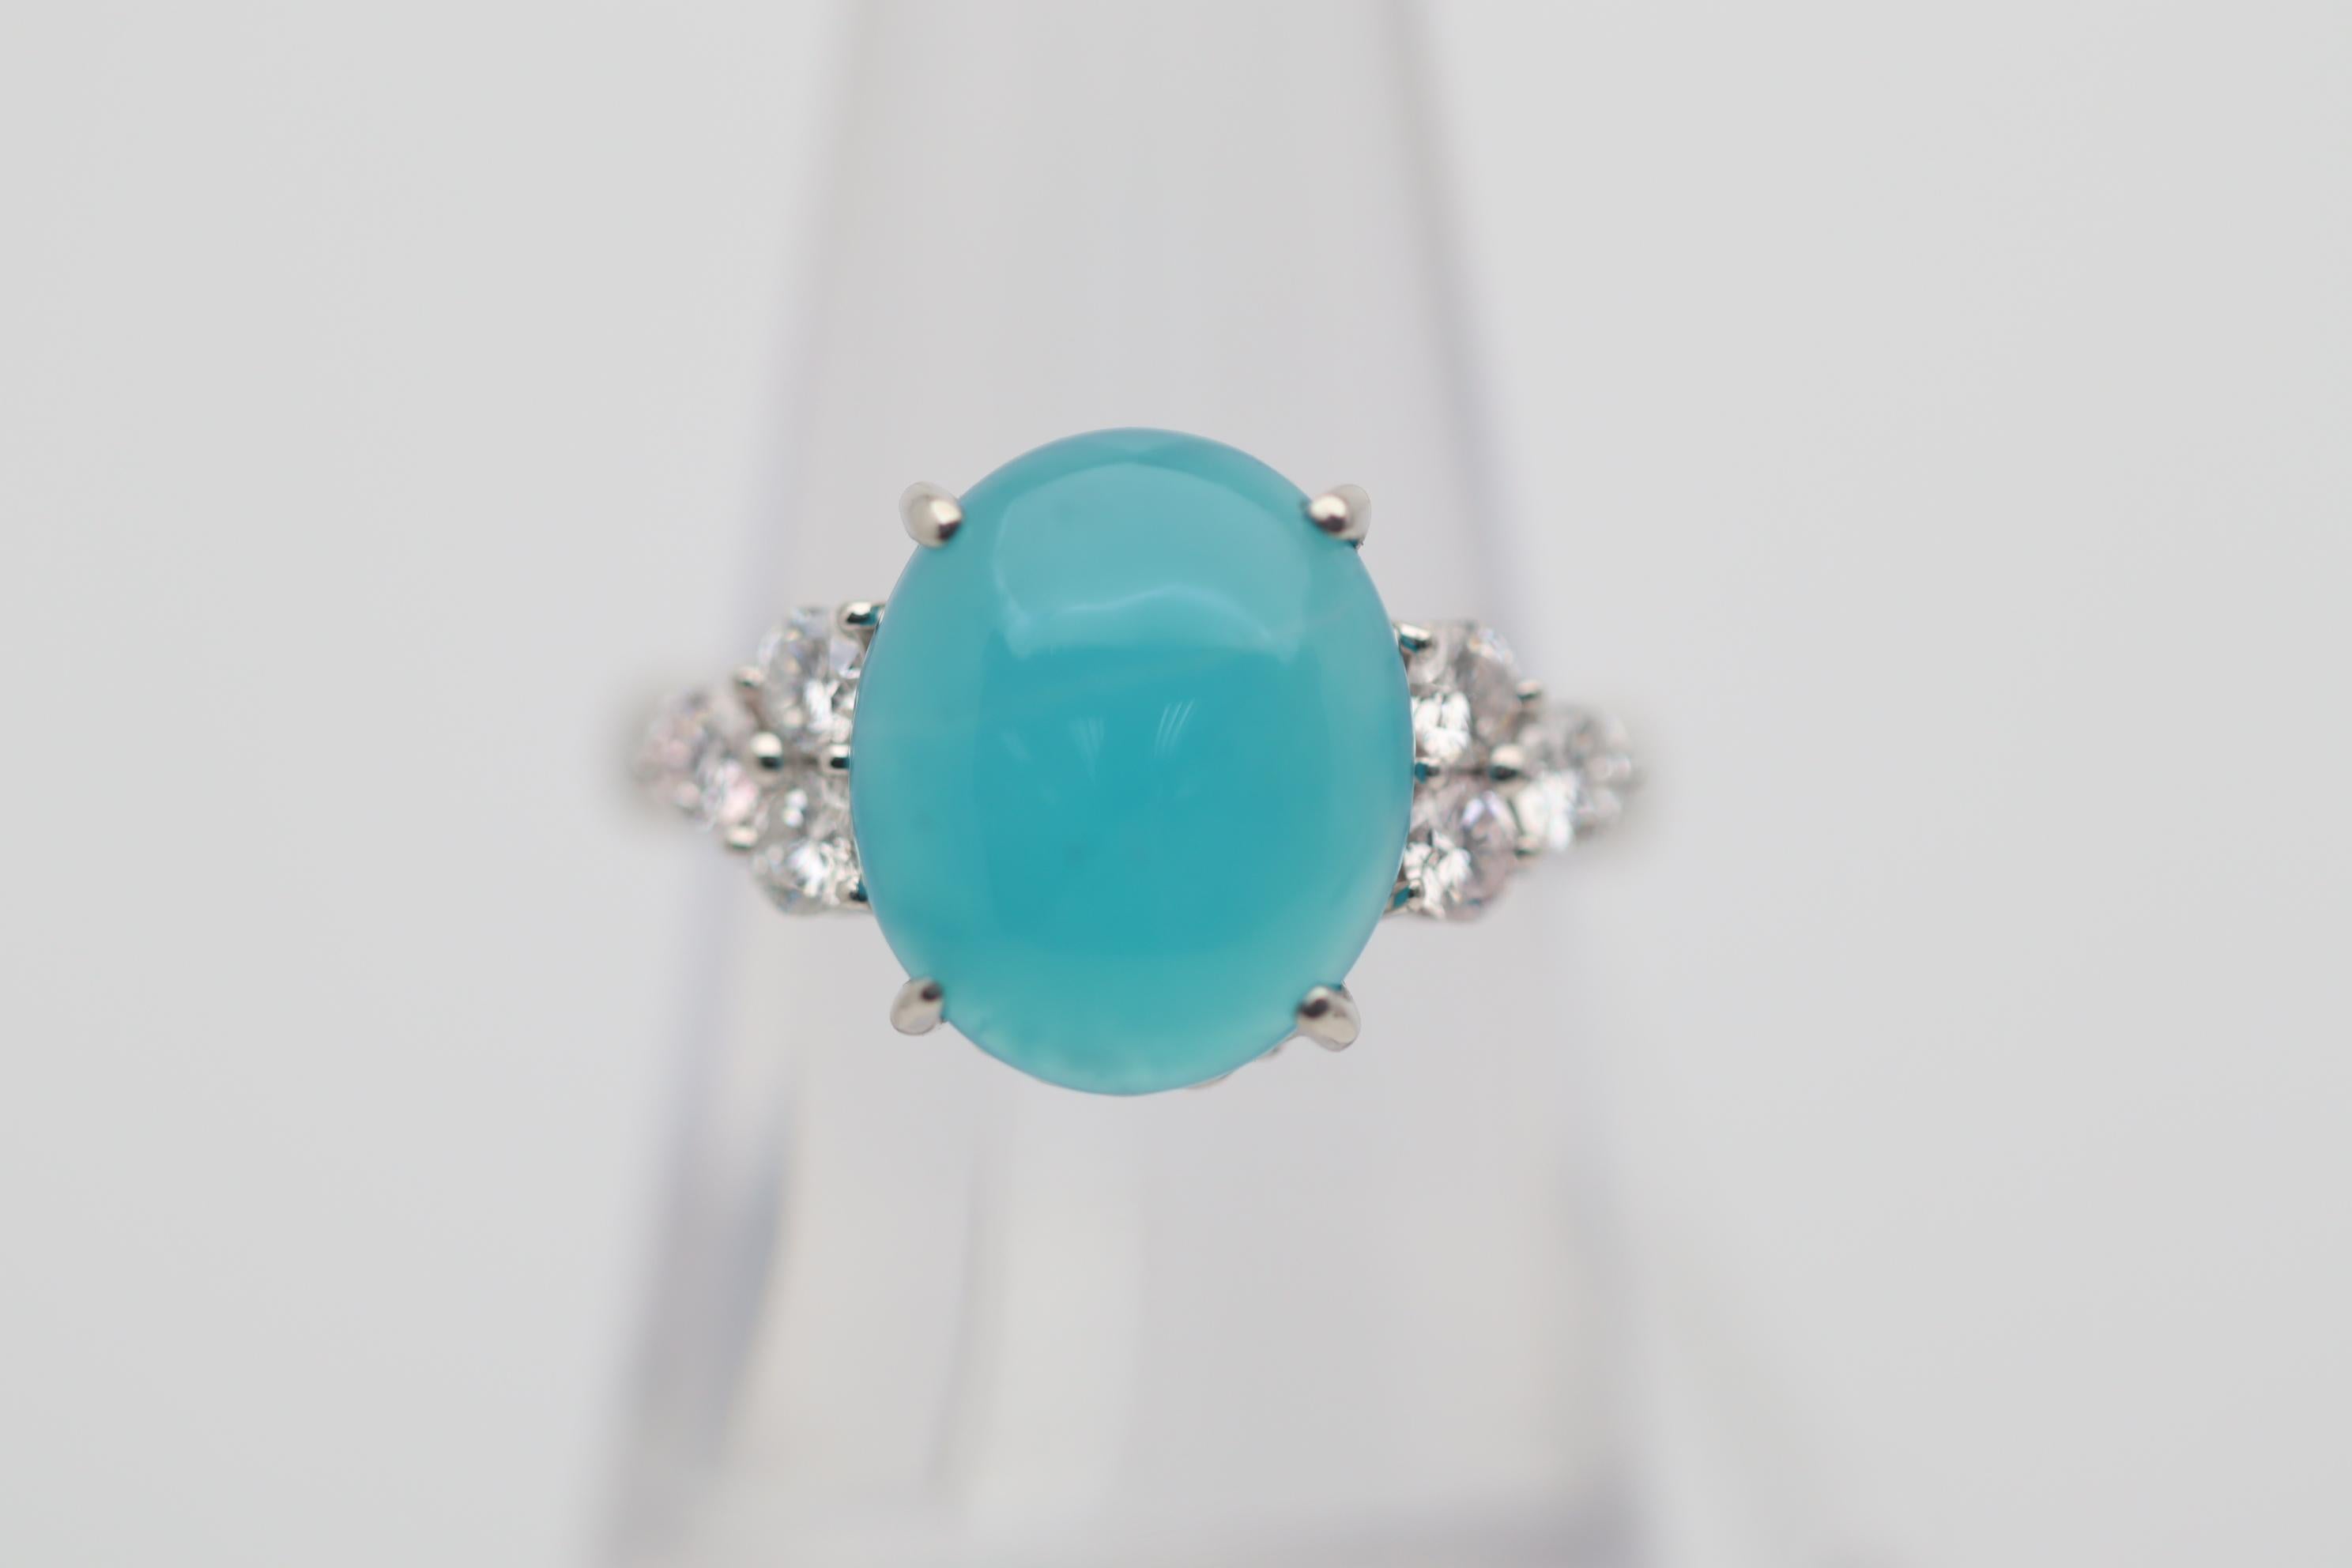 A fine and unique gemstone, chrysocolla, the bright blue variety of chalcedony, takes center stage. It weighs 4.24 carats and has a rich slightly greenish-blue color that is so pleasing to look at. It is complemented by 0.50 carats of round